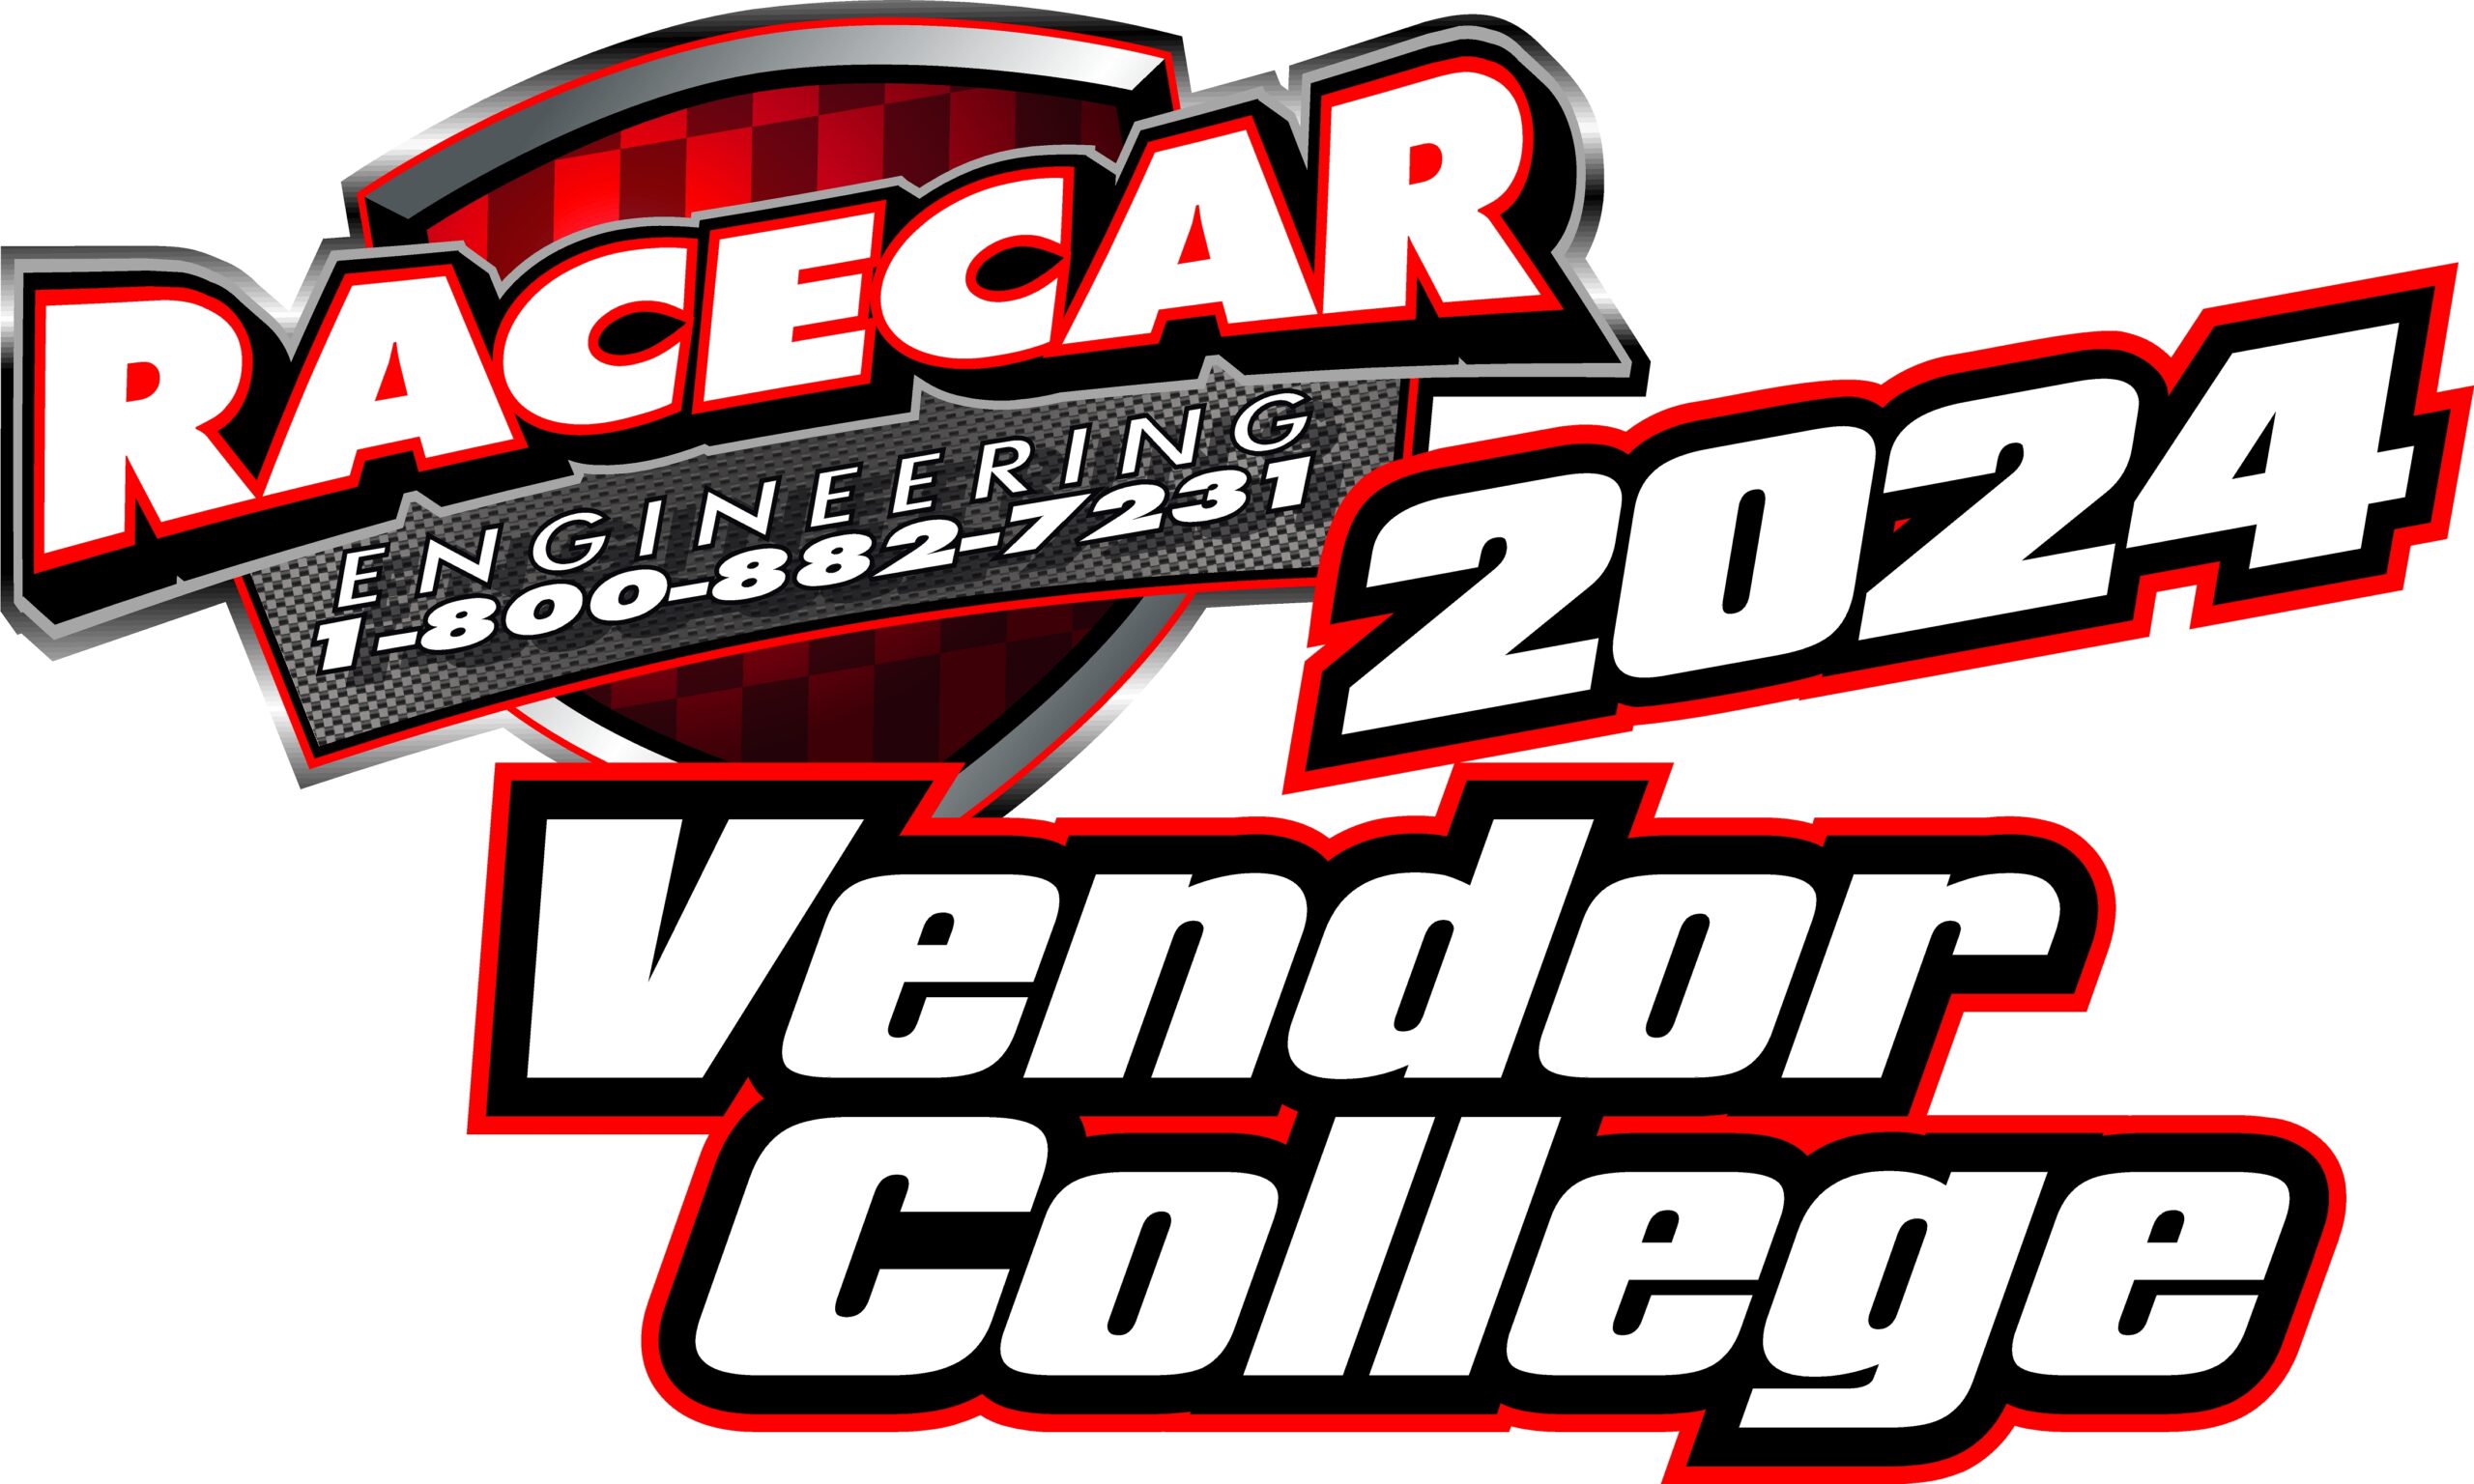 Racecar Engineering Hosts Annual Vendor College Event | THE SHOP